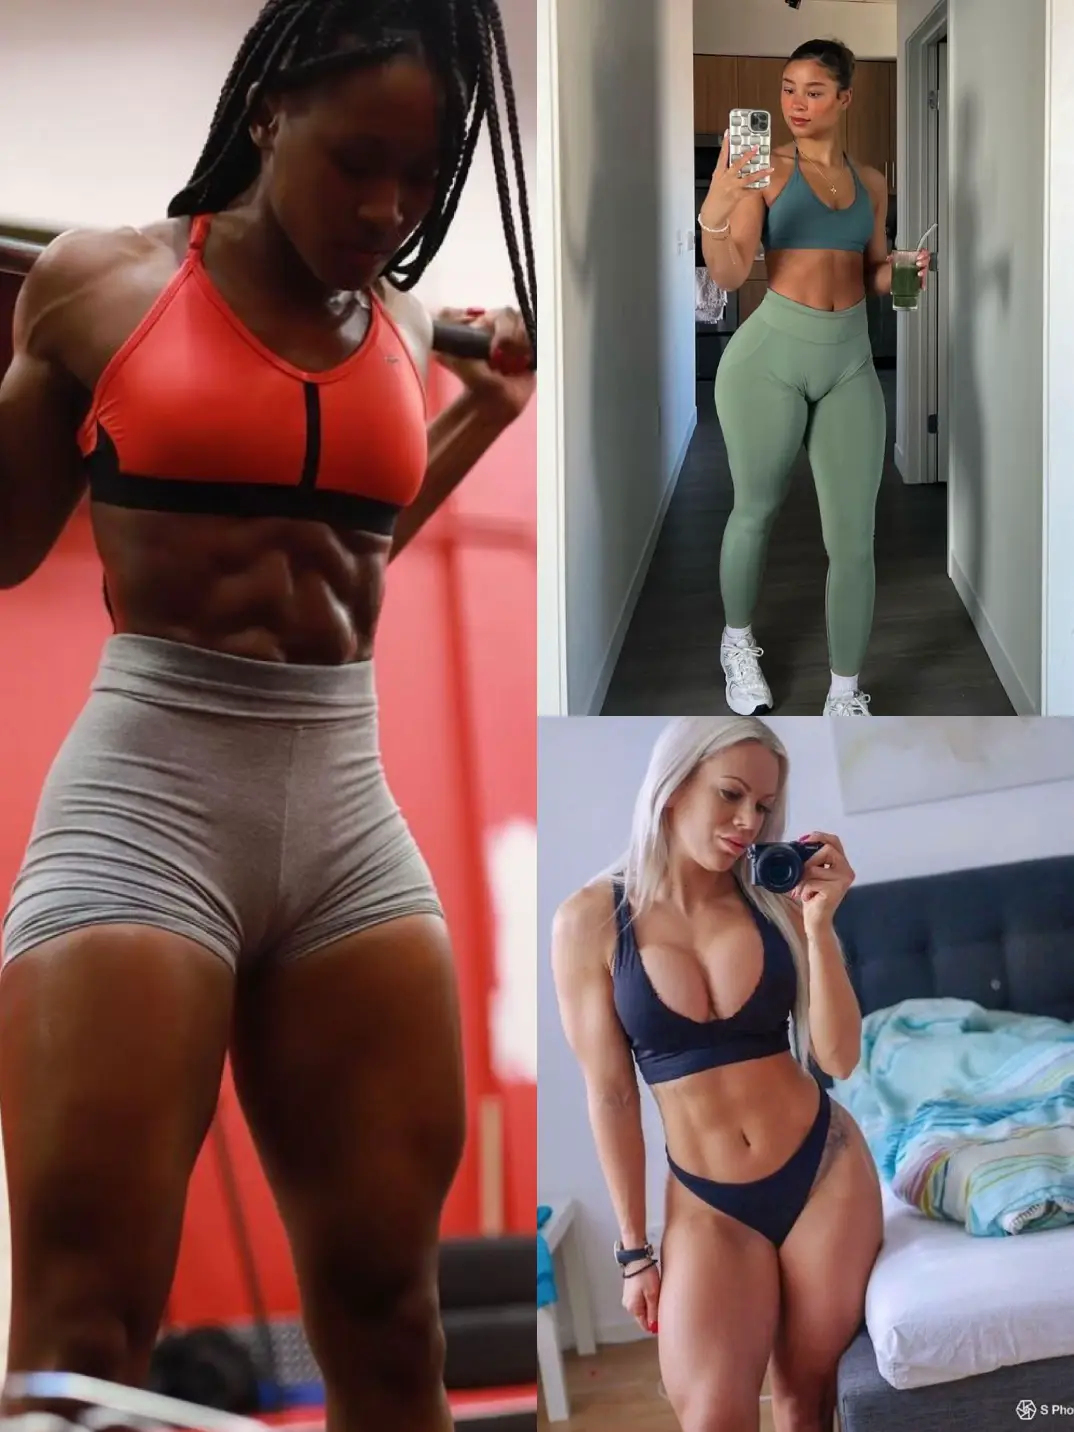 Power building ,curvy fit, or both, Gallery posted by JESSICA